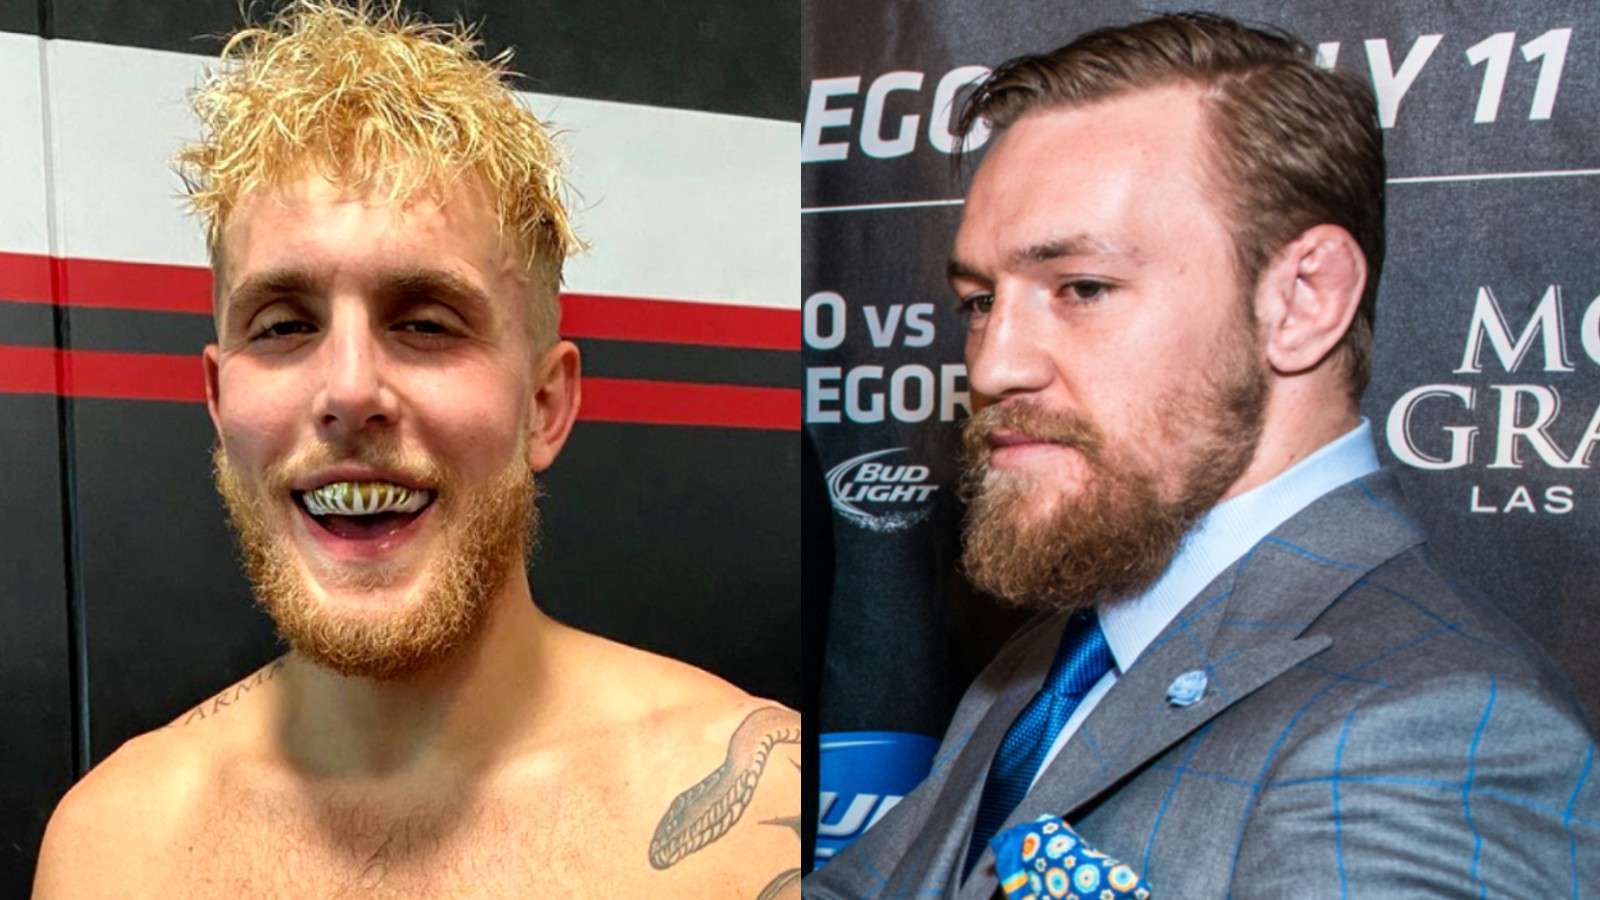 Image of Jake Paul and image of Conor McGregor side by side